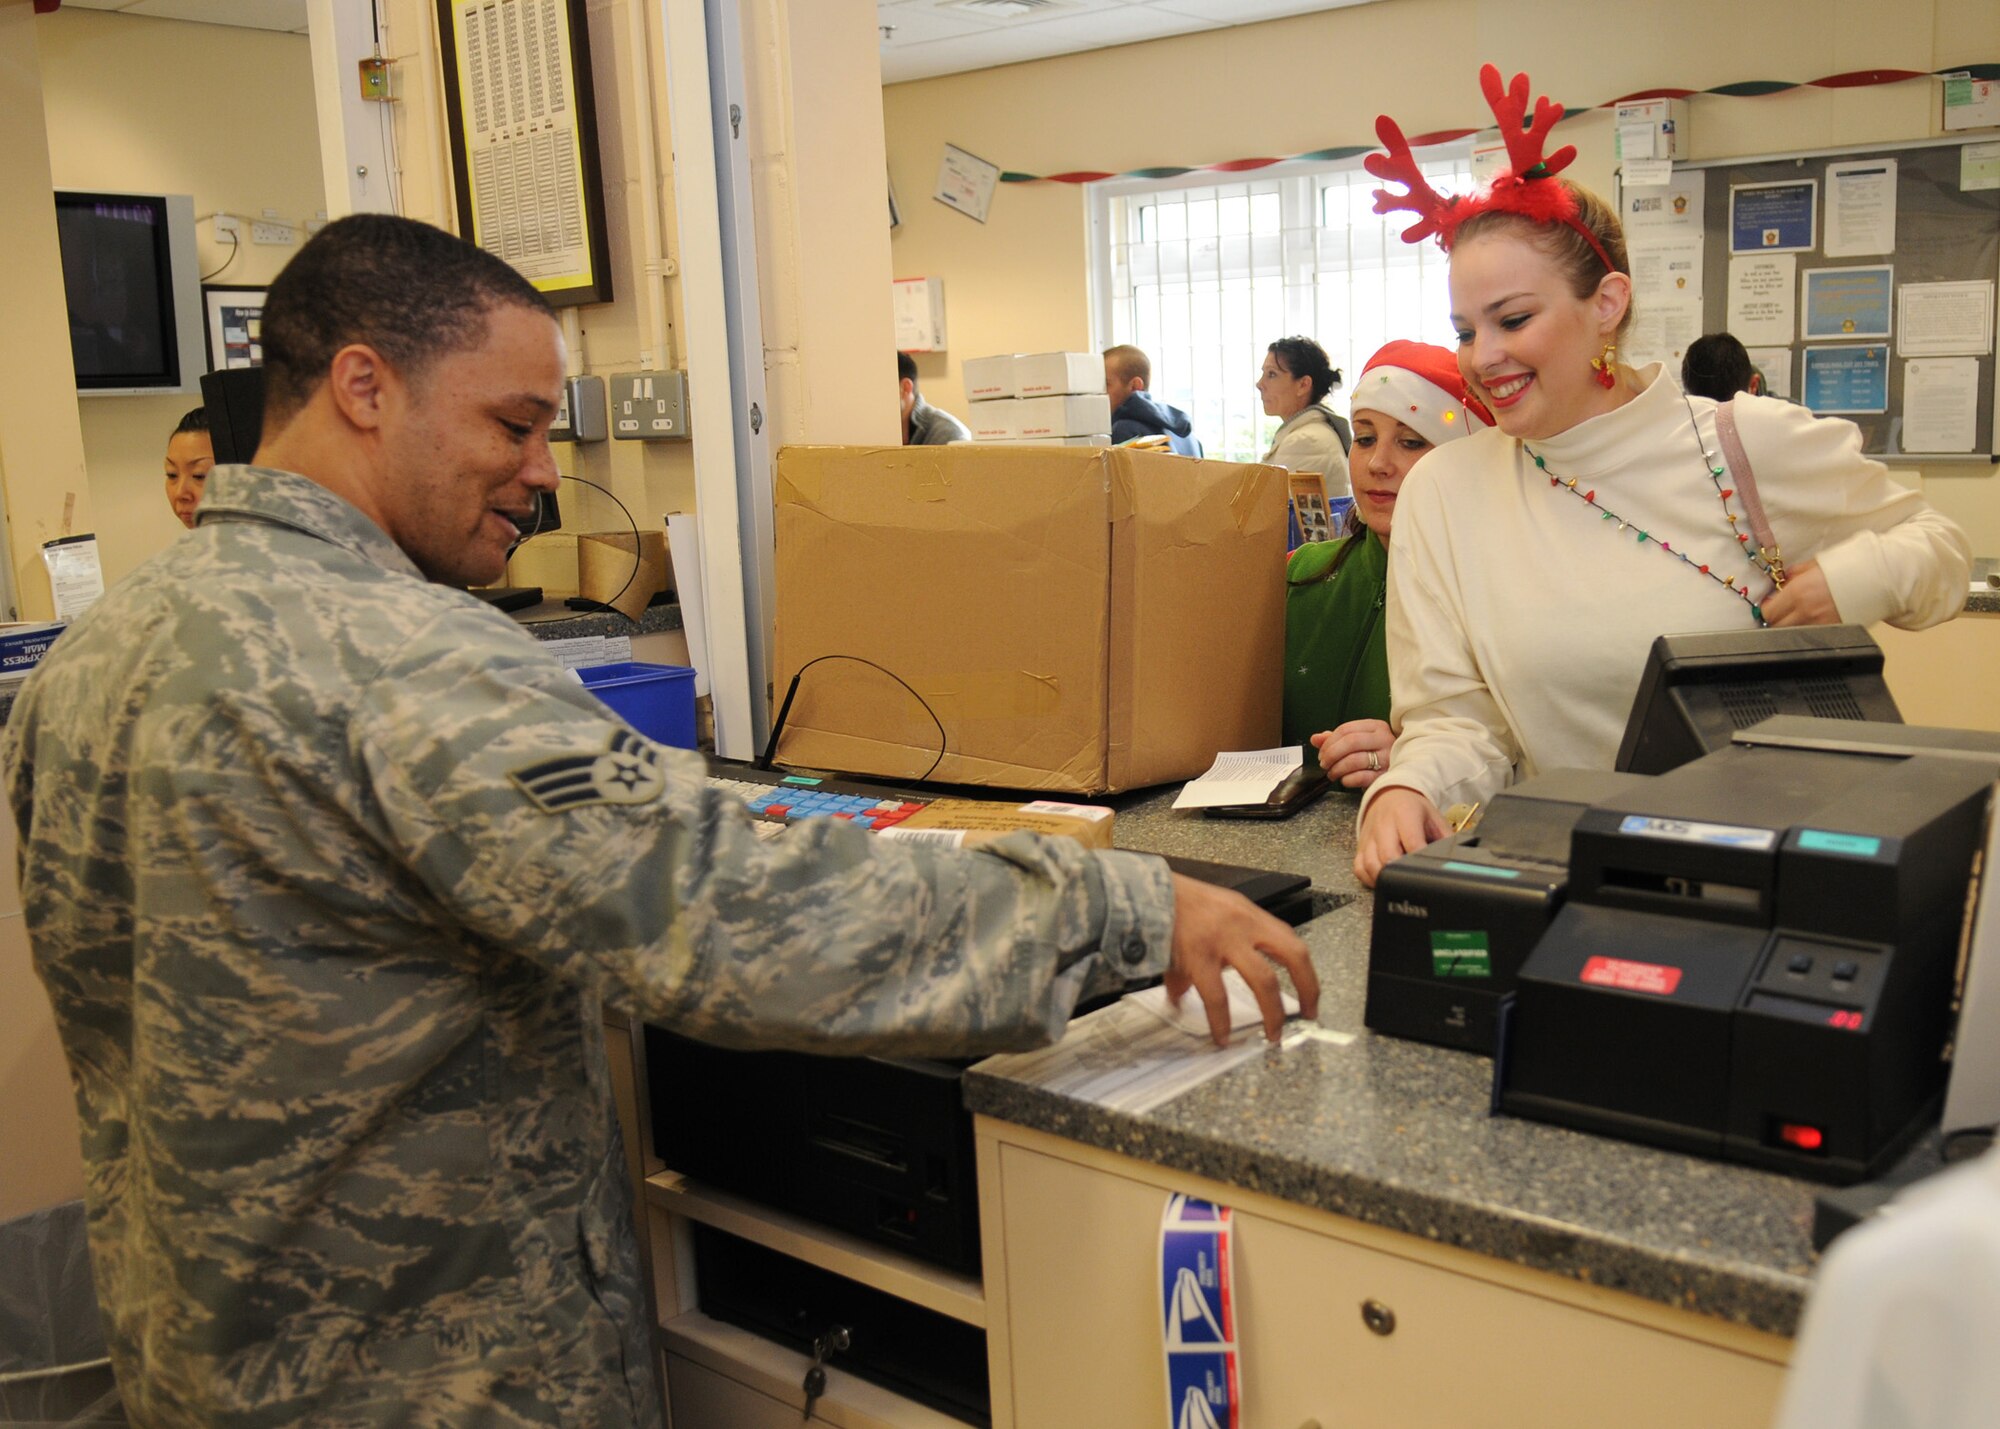 RAF MILDENHALL, England – Senior Airman Denny Williams, 100th Communication Squadron postal clerk, assists Marissa Nunnes and Alex House with an outgoing package at the RAF Mildenhall Post Office Dec. 15. The post office will be providing extended hours during the holiday season. Outgoing mail will be open from 8:30 a.m. to 5 p.m. Monday through Friday and 9 a.m. to 1 p.m. Saturday. The pick-up window hours are 8 a.m. to 6 p.m Monday through Friday and 9 a.m to 1 p.m. Saturday. The post office will resume normal business hours Dec. 28. (U.S. Air Force photo/ Staff Sgt. Jerry Fleshman)